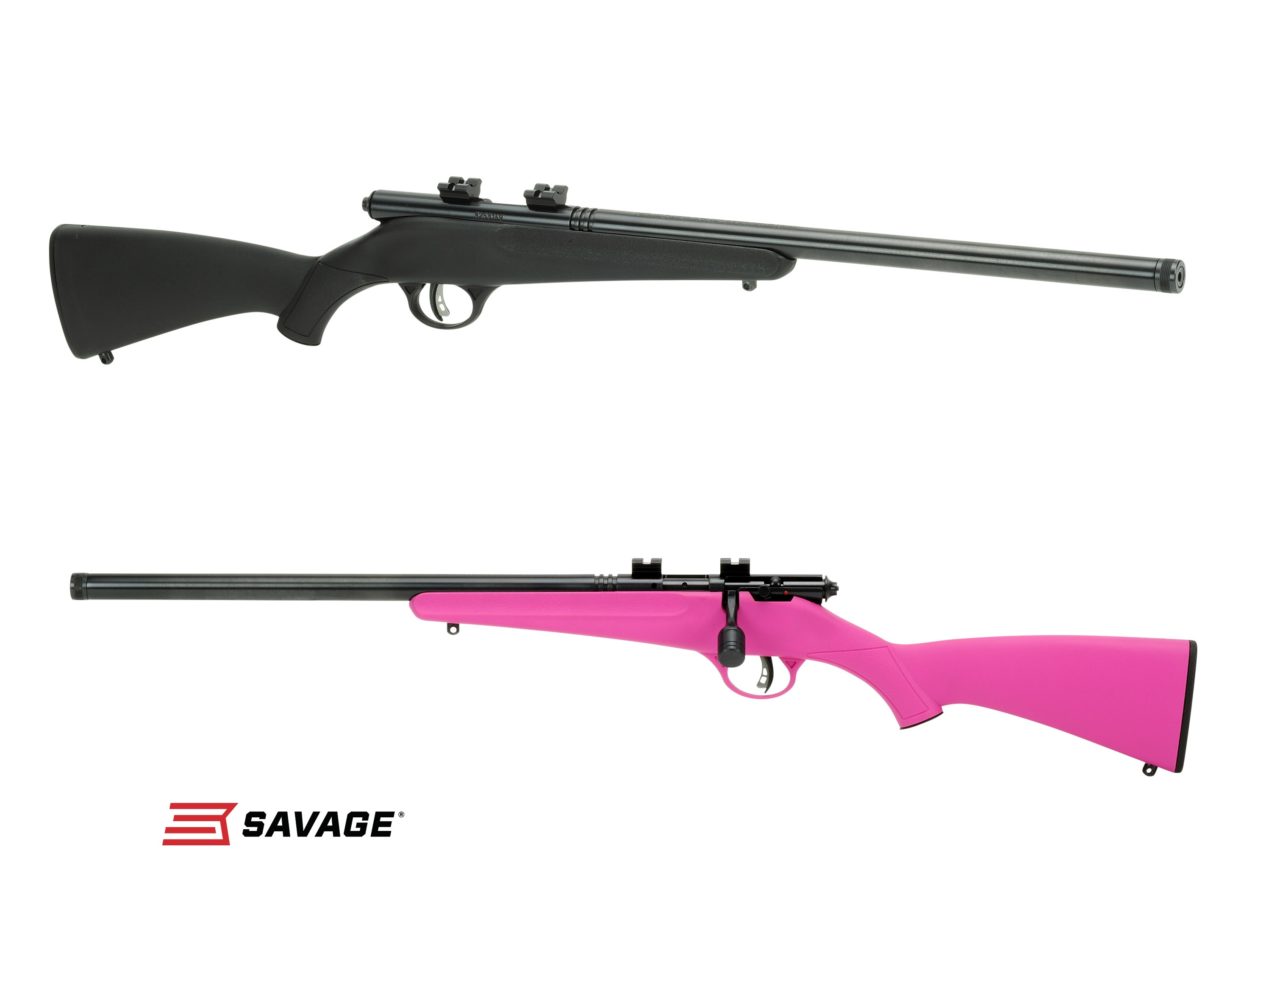 Savage’s Adds Rascal Synthetic-Stock Left-Hand Models